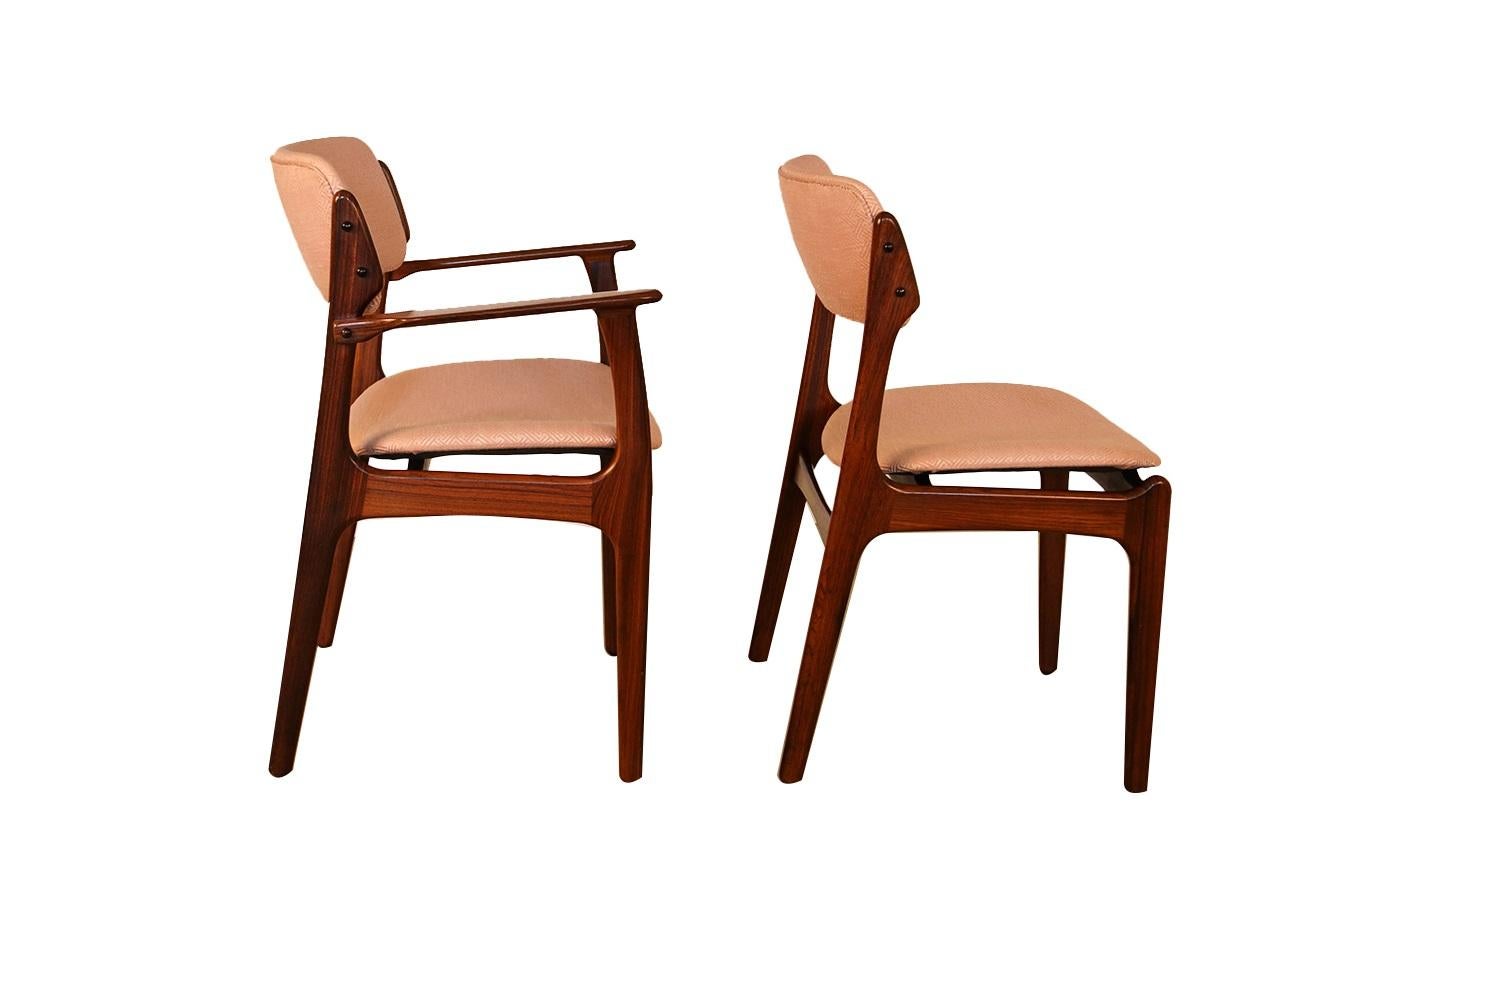 Upholstery Midcentury Erik Buch for Oddense Maskinsnedkeri A/S Rosewood Dining Chairs